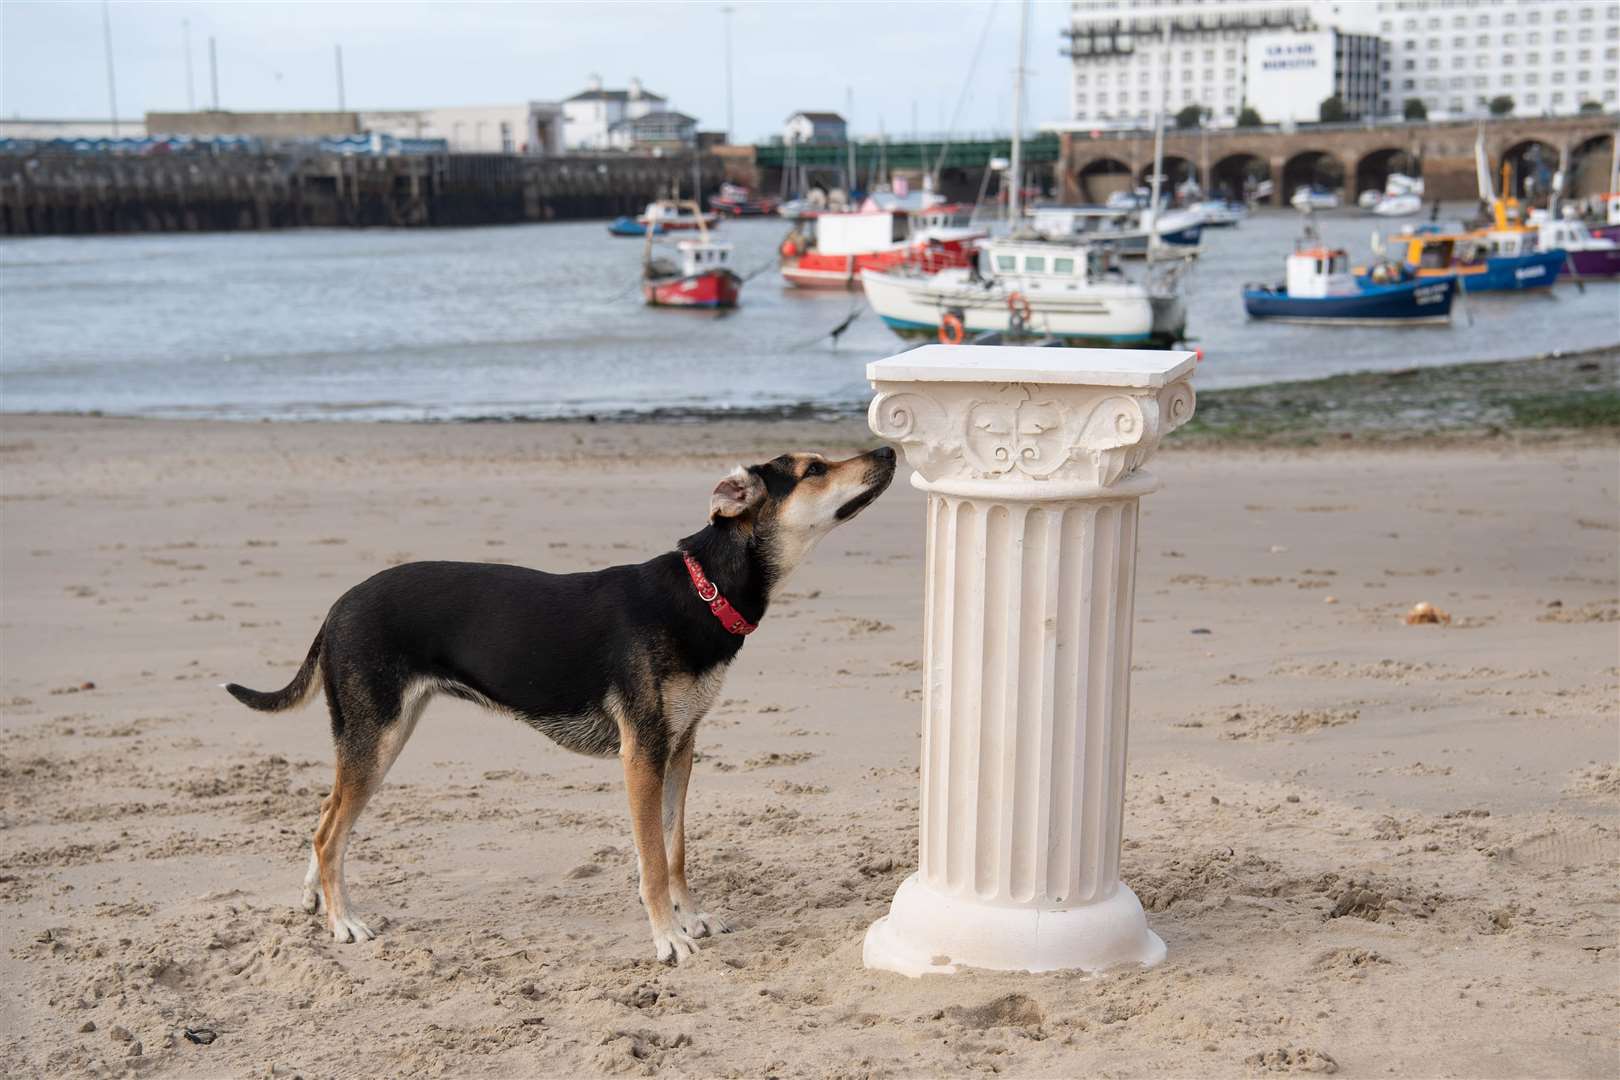 10 vacant plinths have been placed in various locations around the seaside town. Photo credit: Matt Crossick/PA Wire